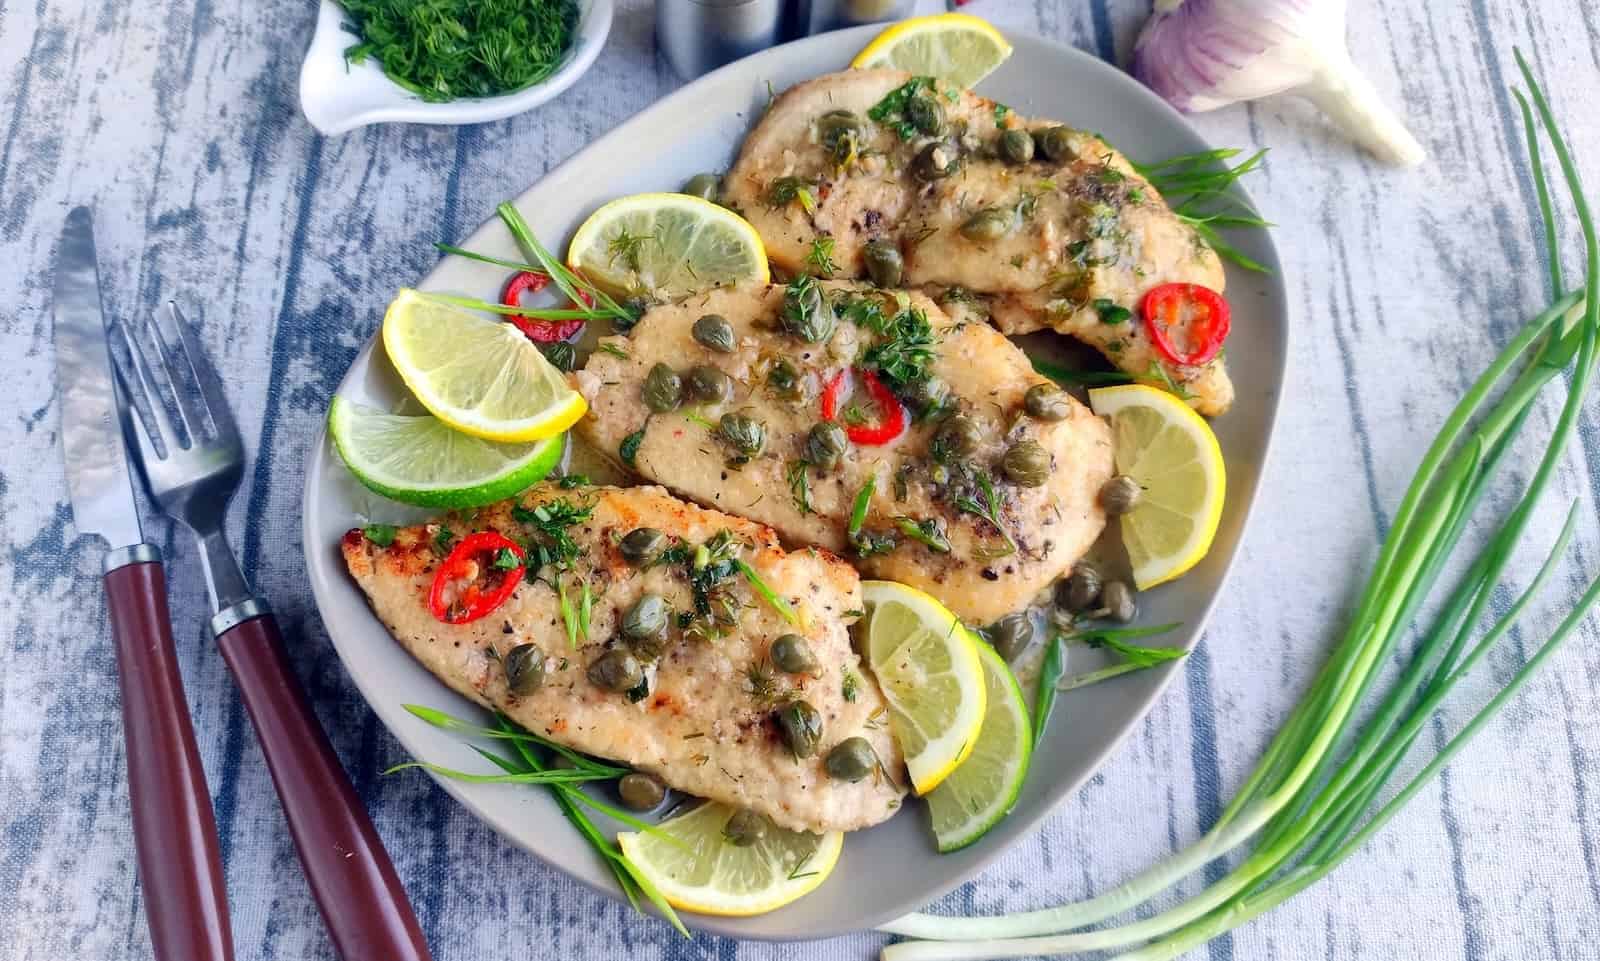 Chicken piccata with lemon and capers on a plate.